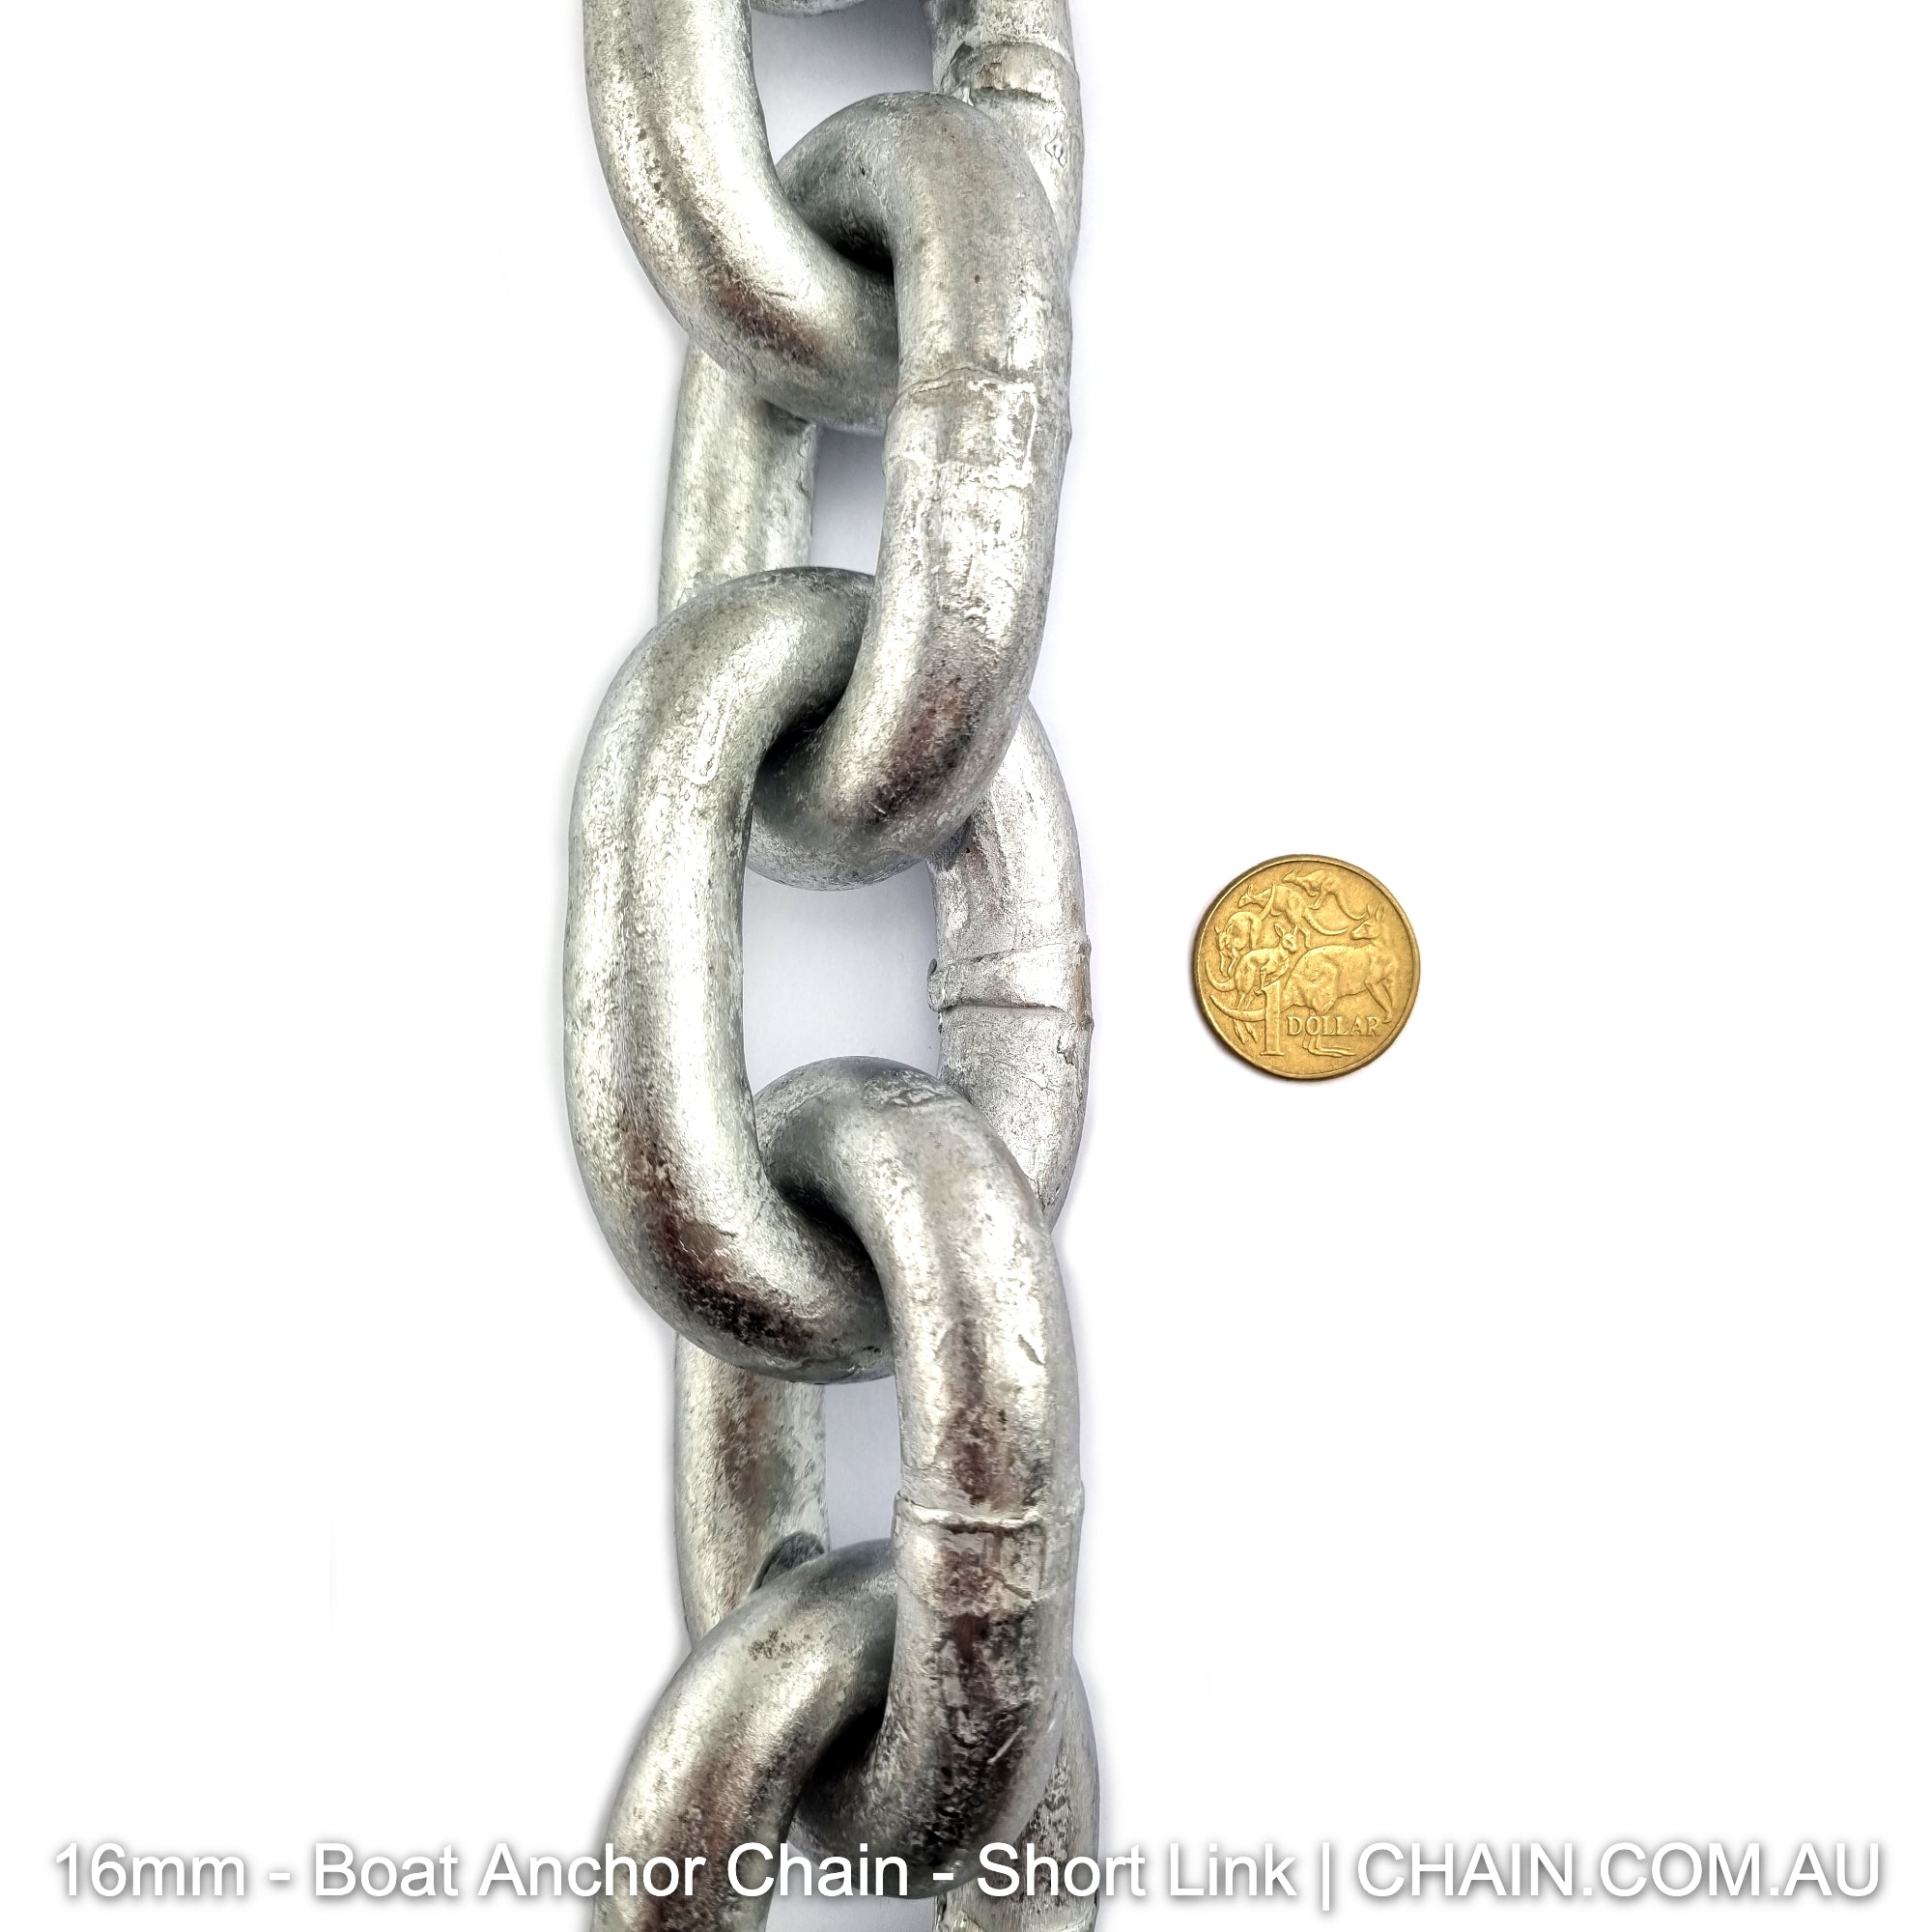 Boat anchor chain, size 16mm short link, galvanised. By the metre or bulk buy 25kg buckets. Shipping Australia wide. Shop online chain.com.au